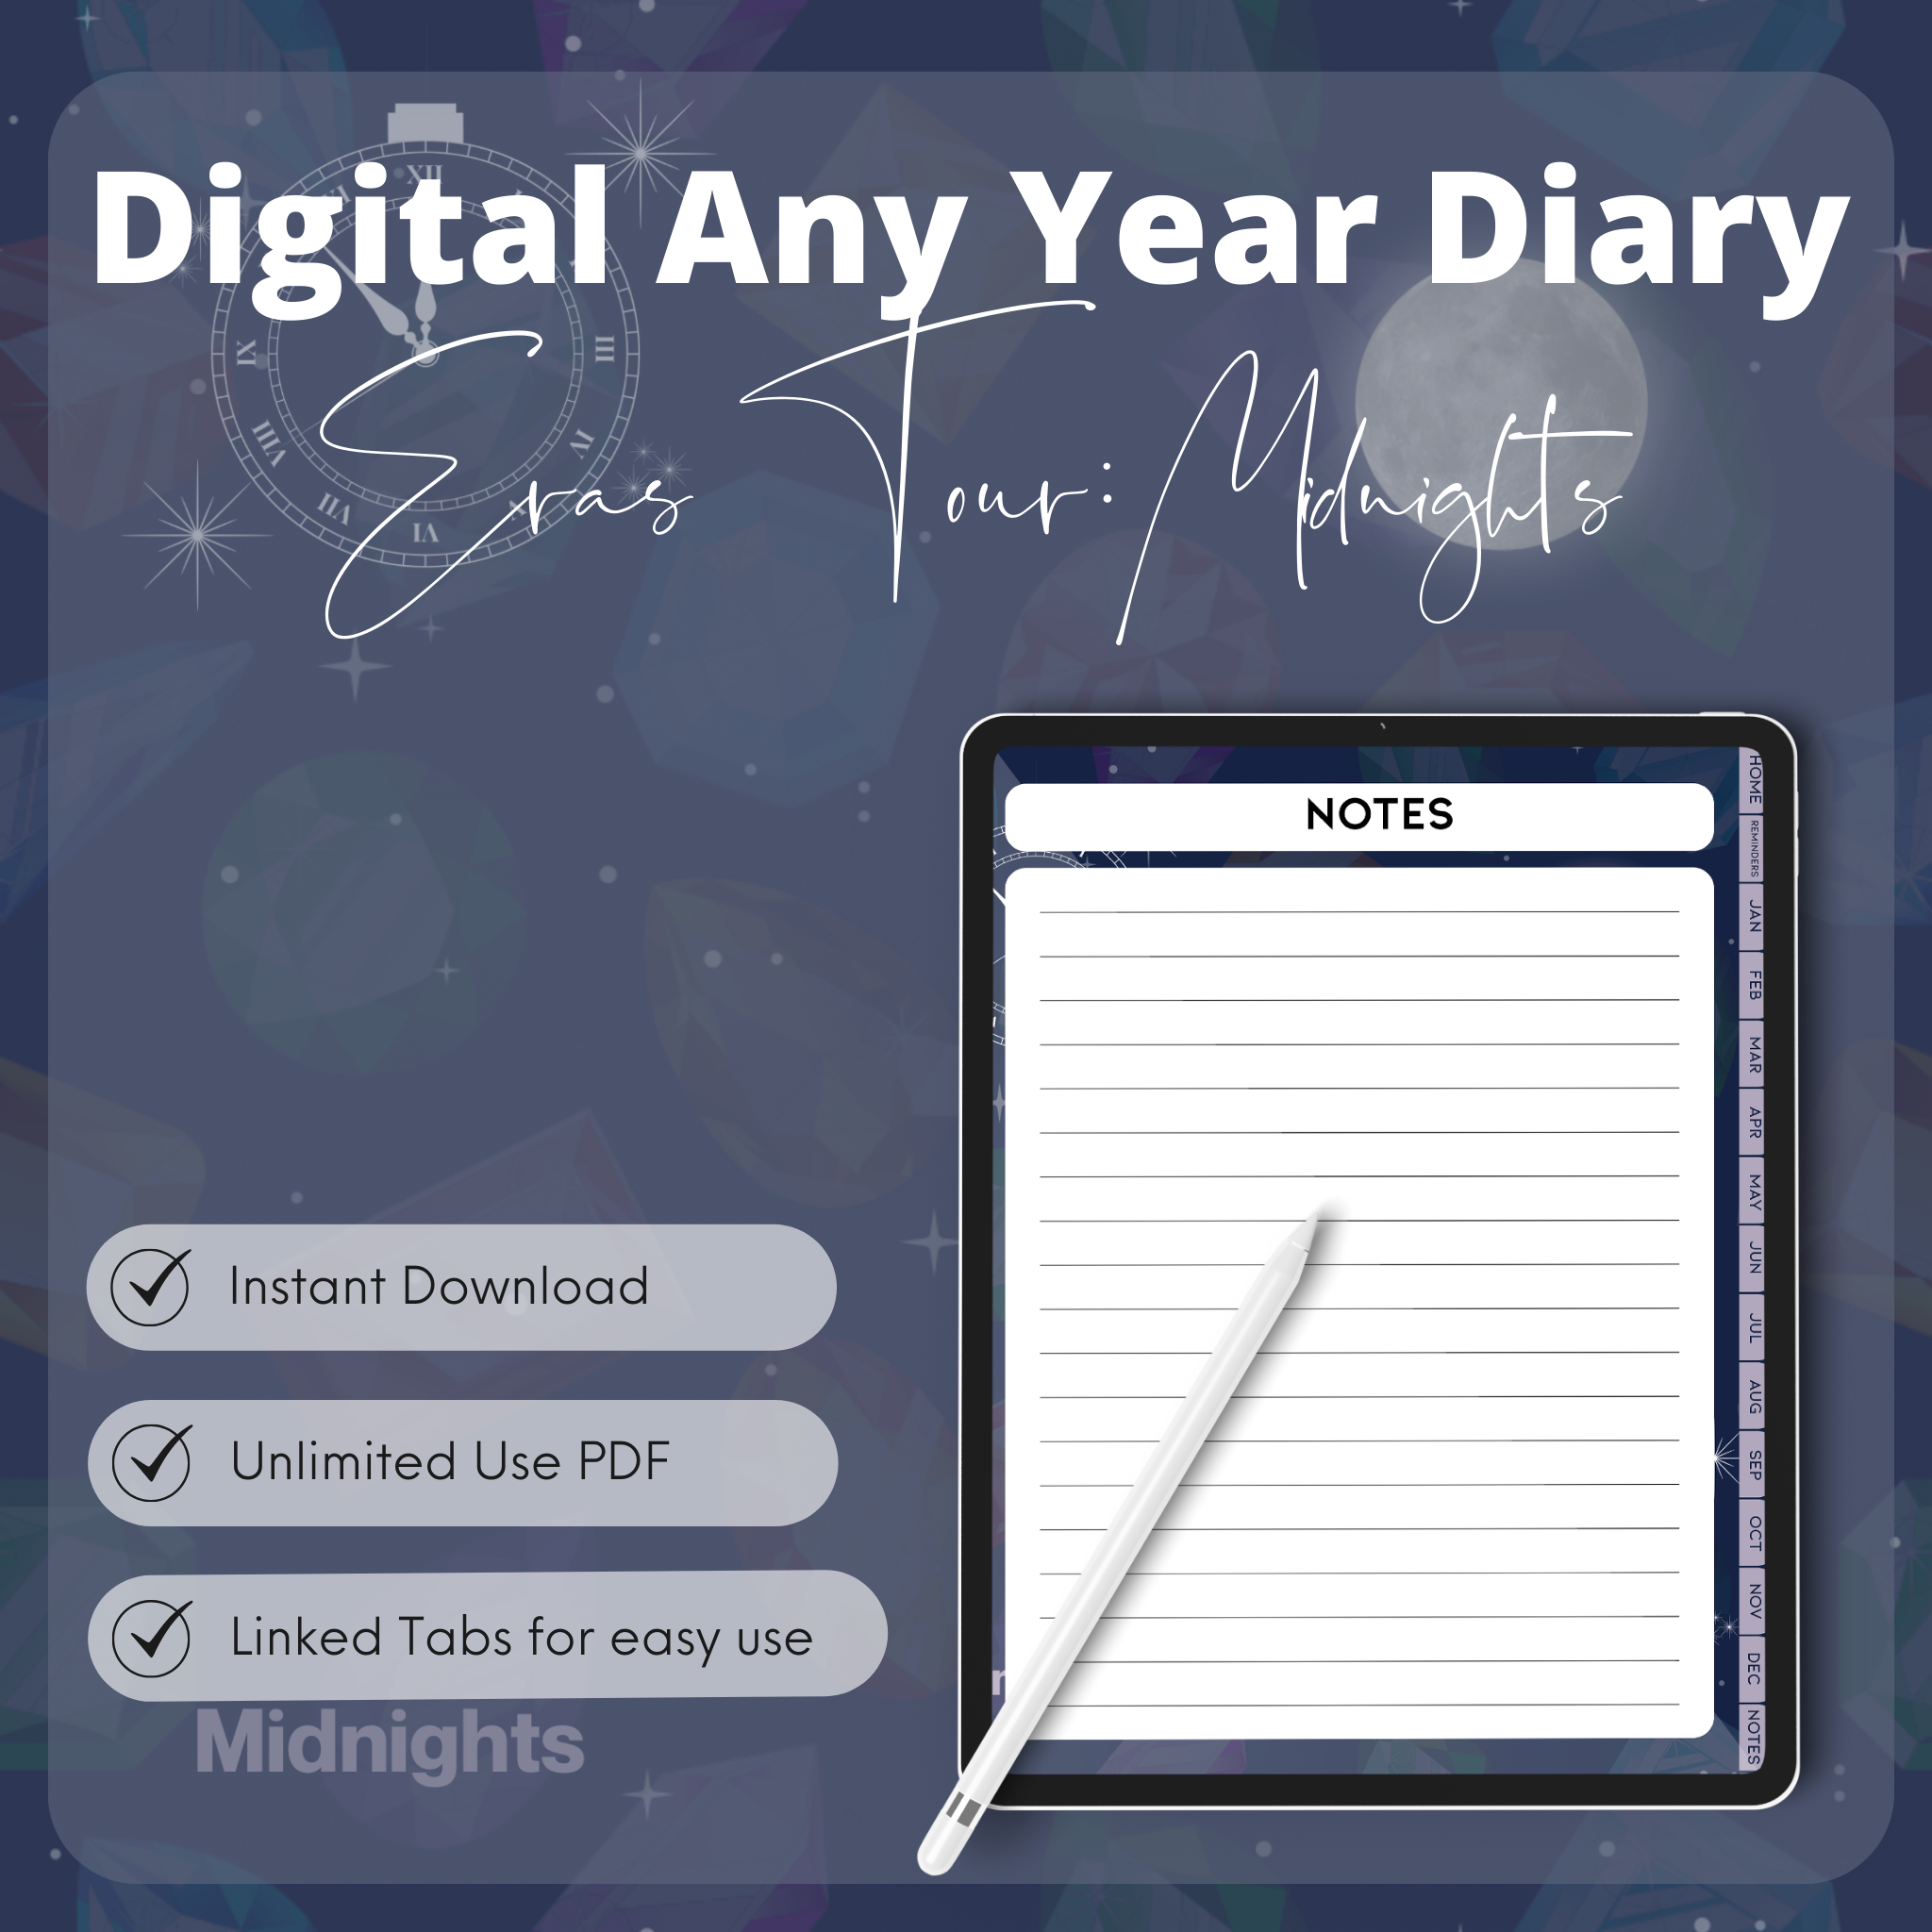 DIGITAL ANY YEAR DIARY (Midnights Print - The Eras Tour)